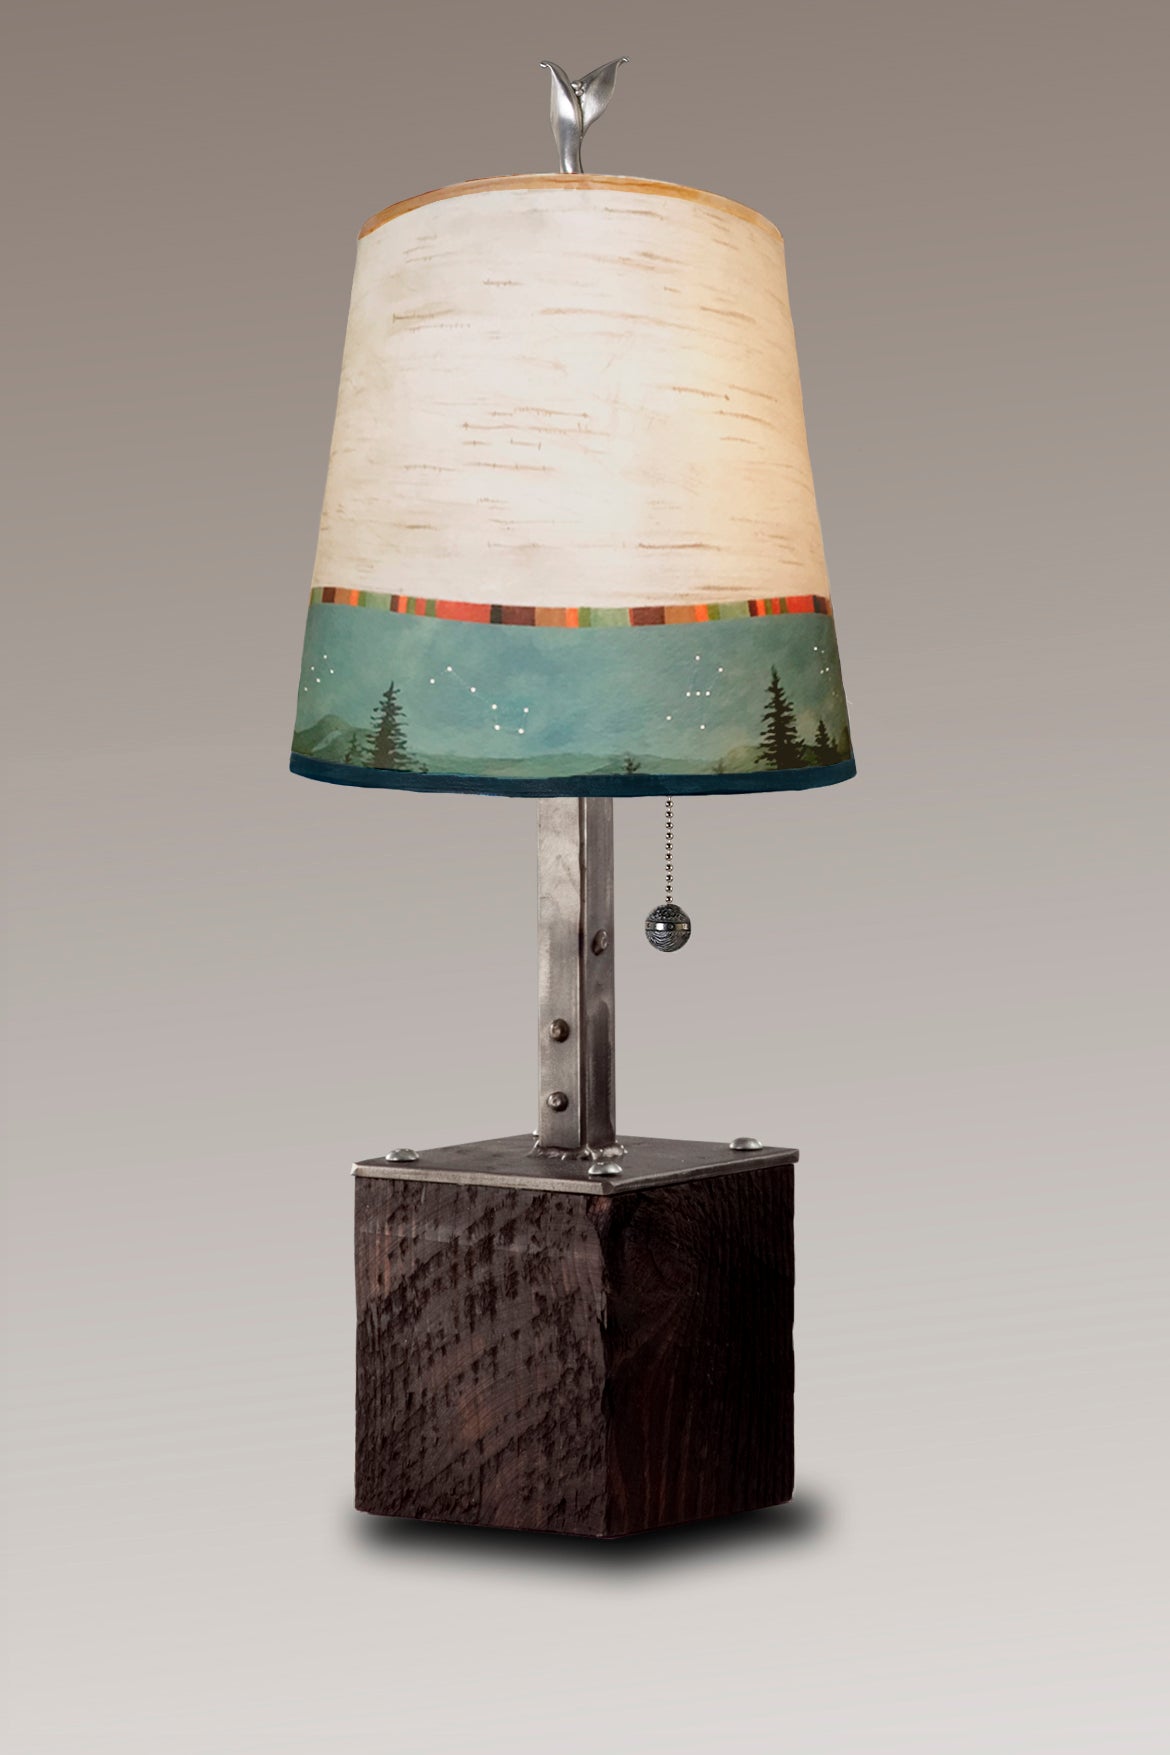 Janna Ugone & Co Table Lamps Steel Table Lamp on Reclaimed Wood with Small Drum Shade in Birch Midnight